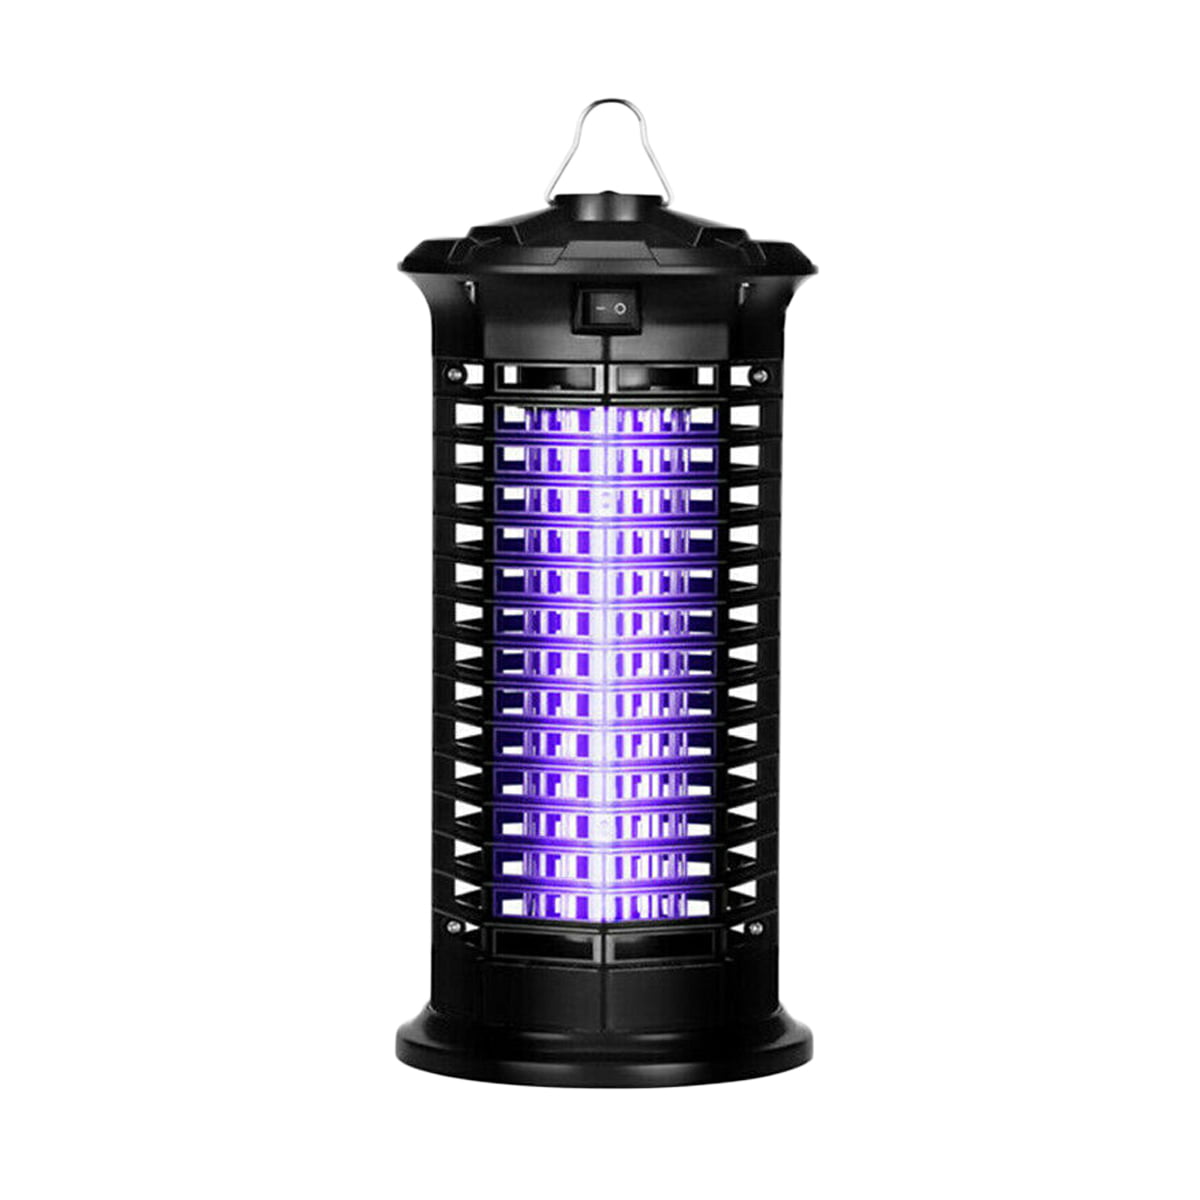 Fly Pests Catcher Lamp for Indoor and Outdoor Camping Bug Zapper with UV Light Electronic Insect Killer Mosquito Lamp with Built in Fan Mosquito Trap